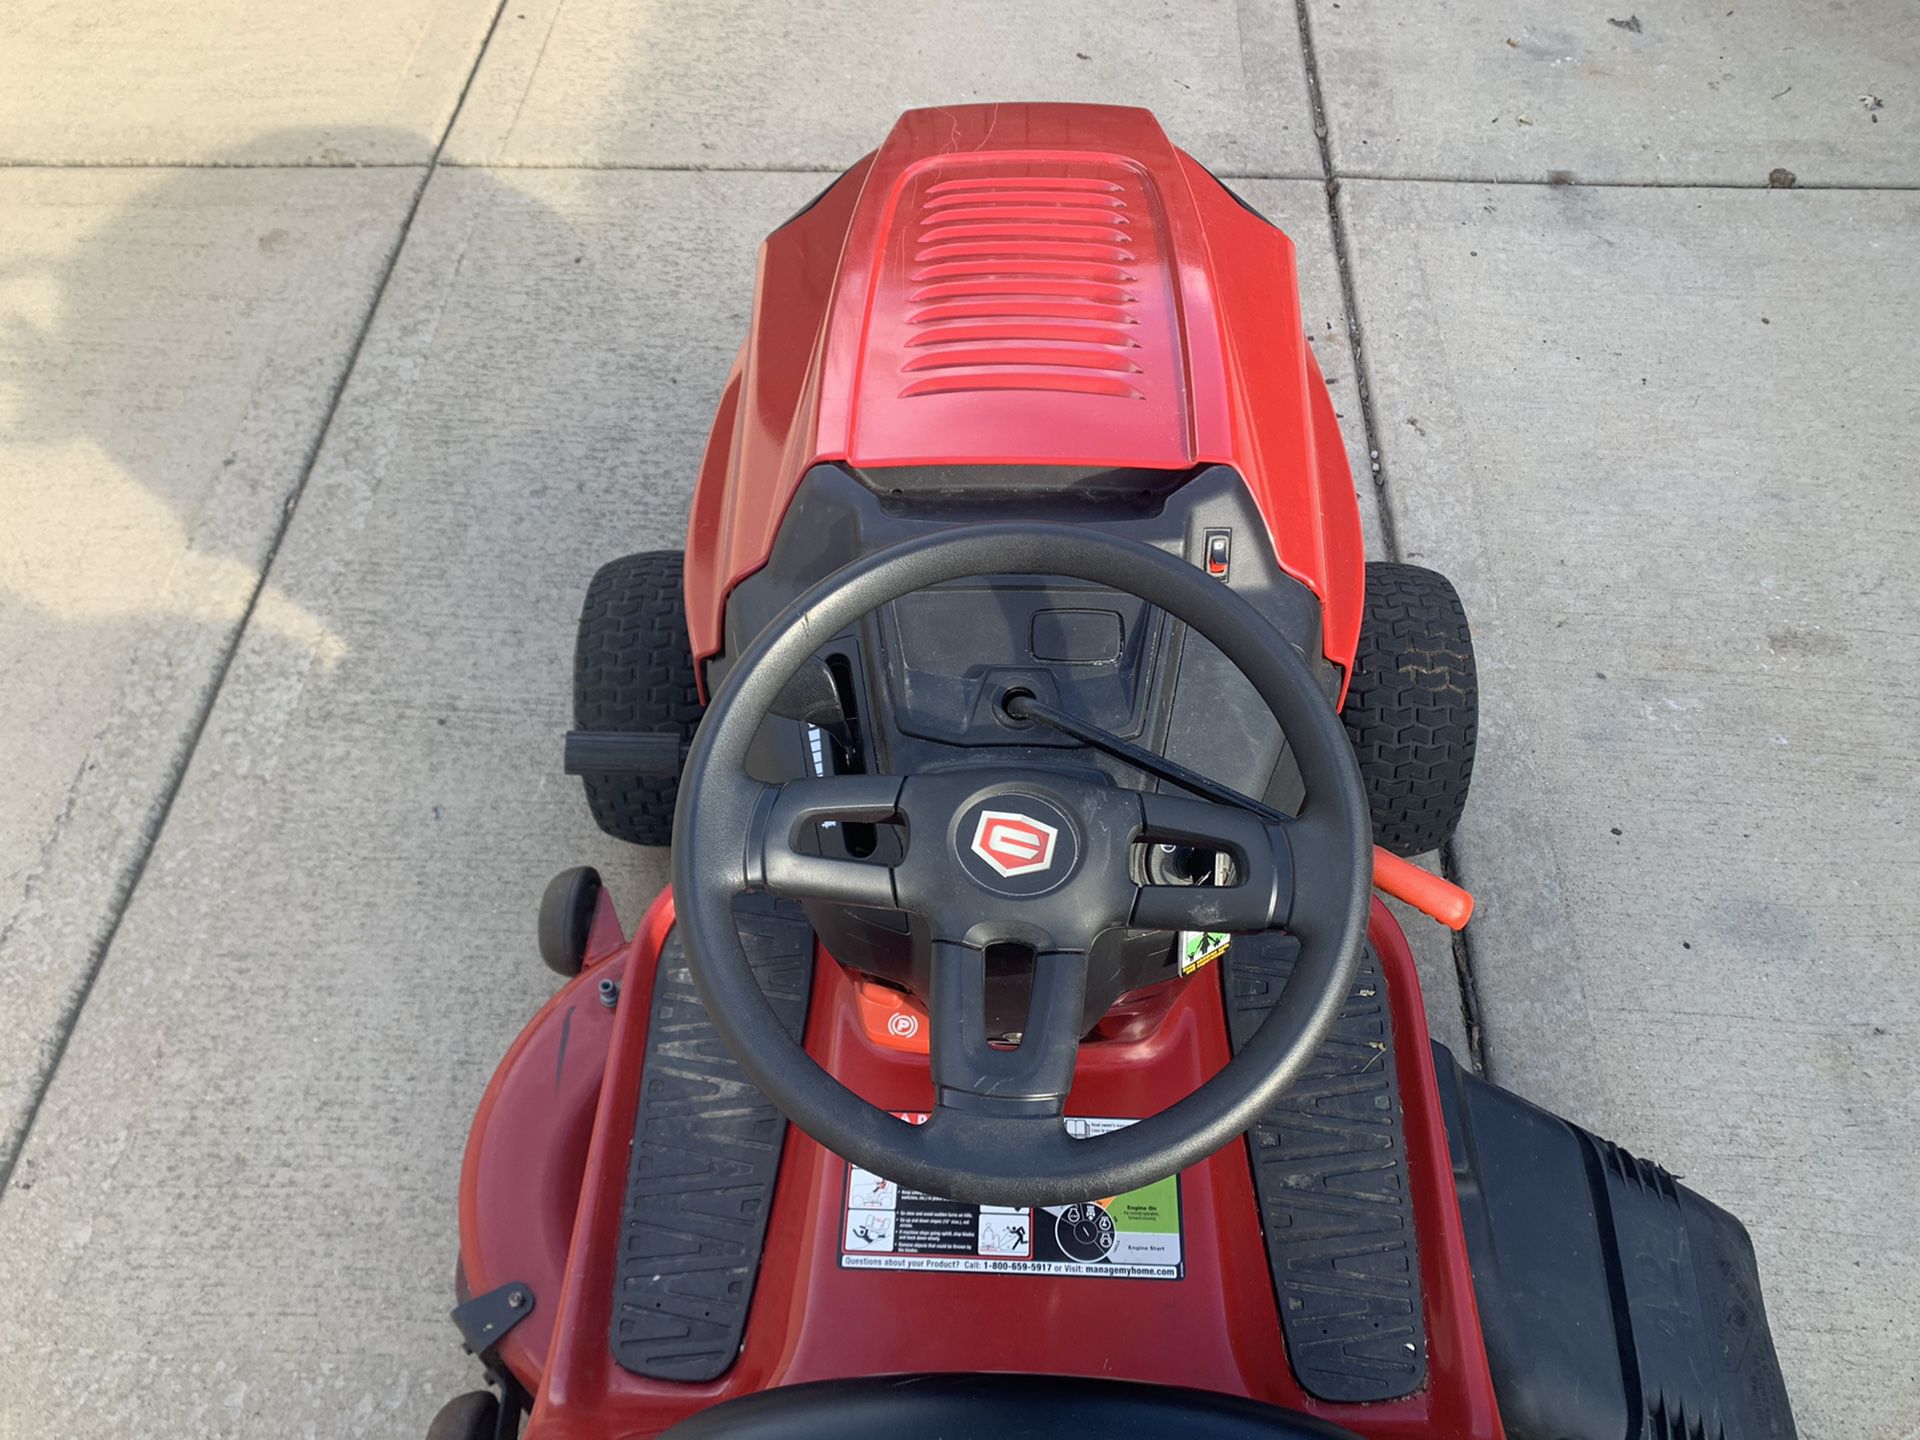 Craftsman T2200 Lawn Mower For Sale In Orland Hills Il Offerup